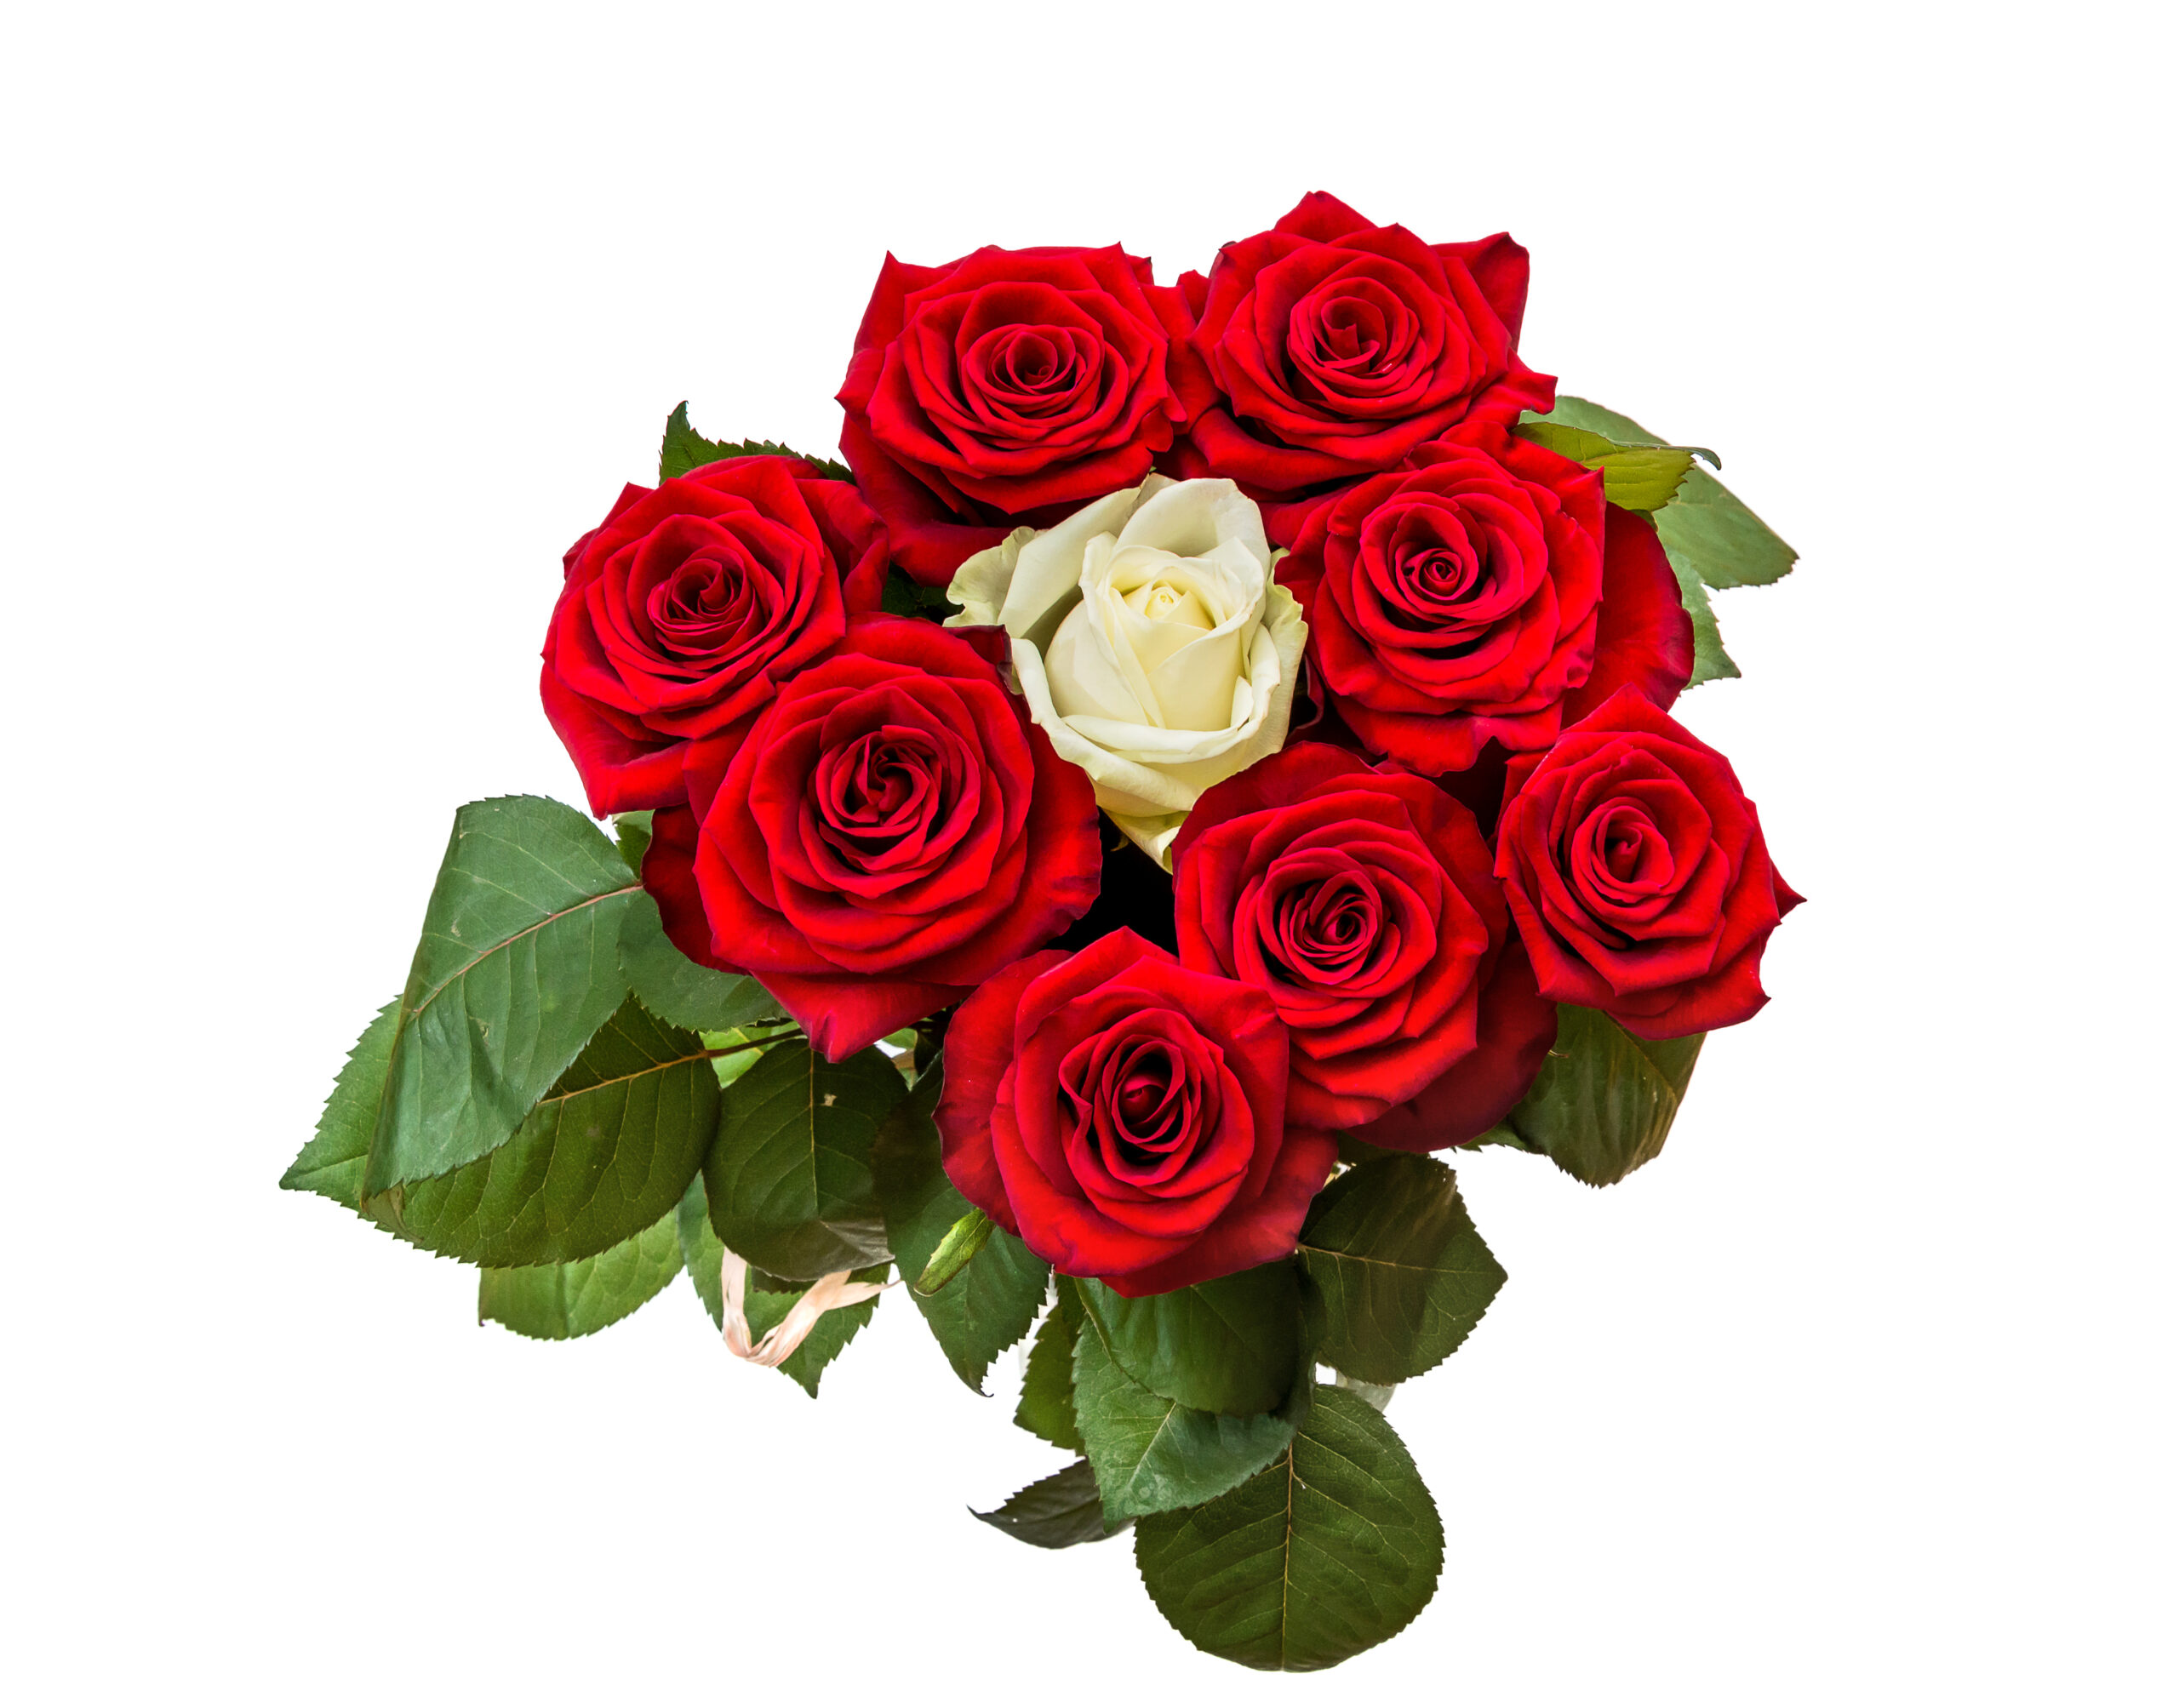 Bouquet of white and red roses. Isolated on white. Top view.